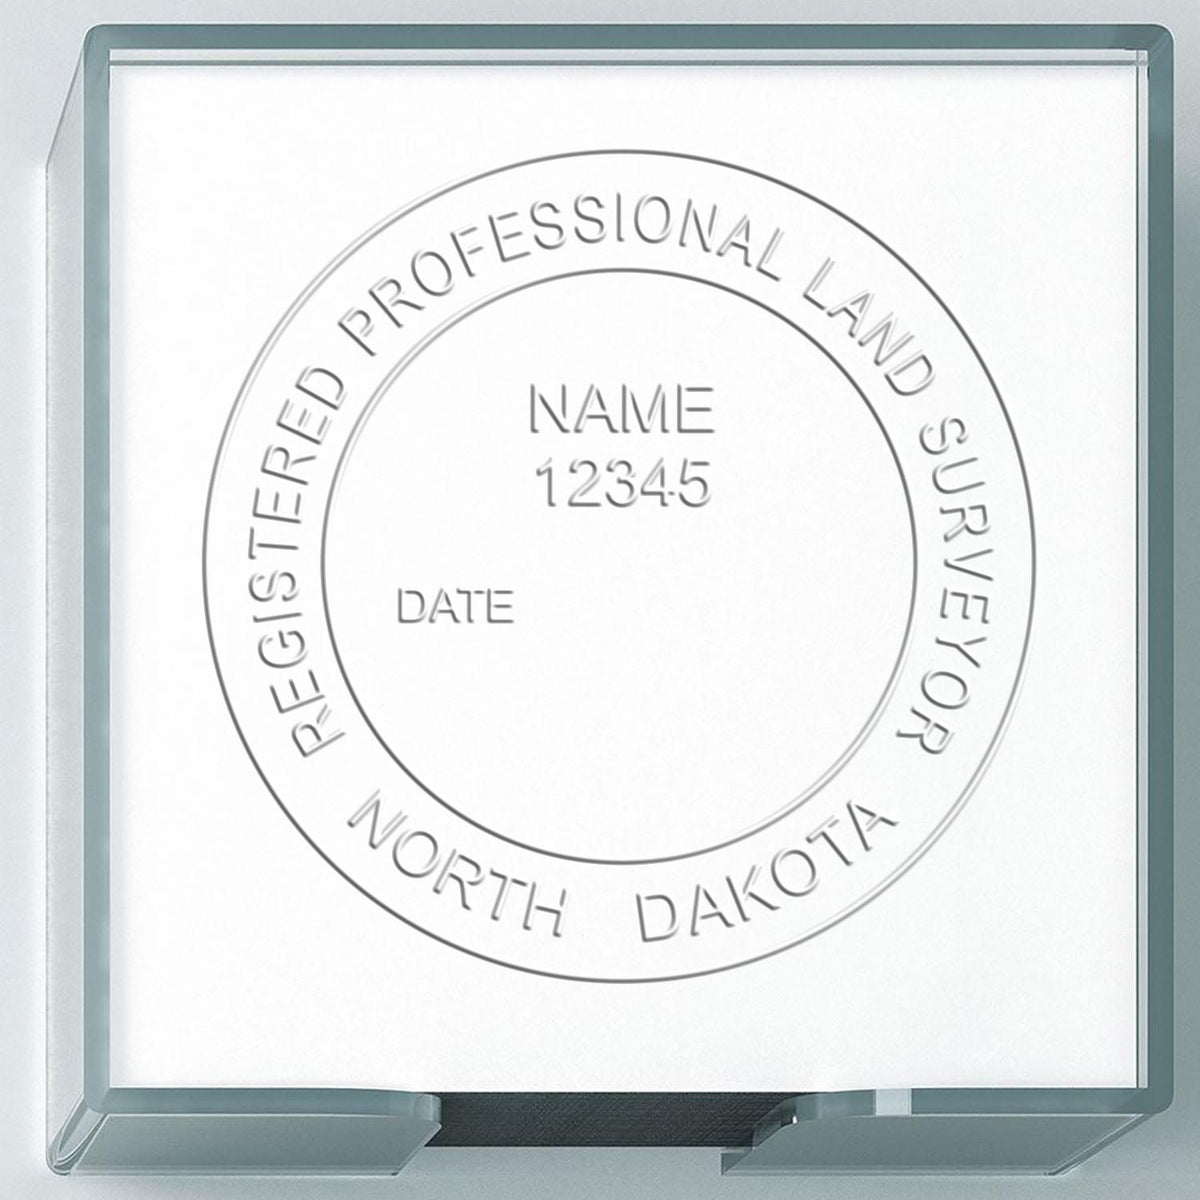 A photograph of the Hybrid North Dakota Land Surveyor Seal stamp impression reveals a vivid, professional image of the on paper.